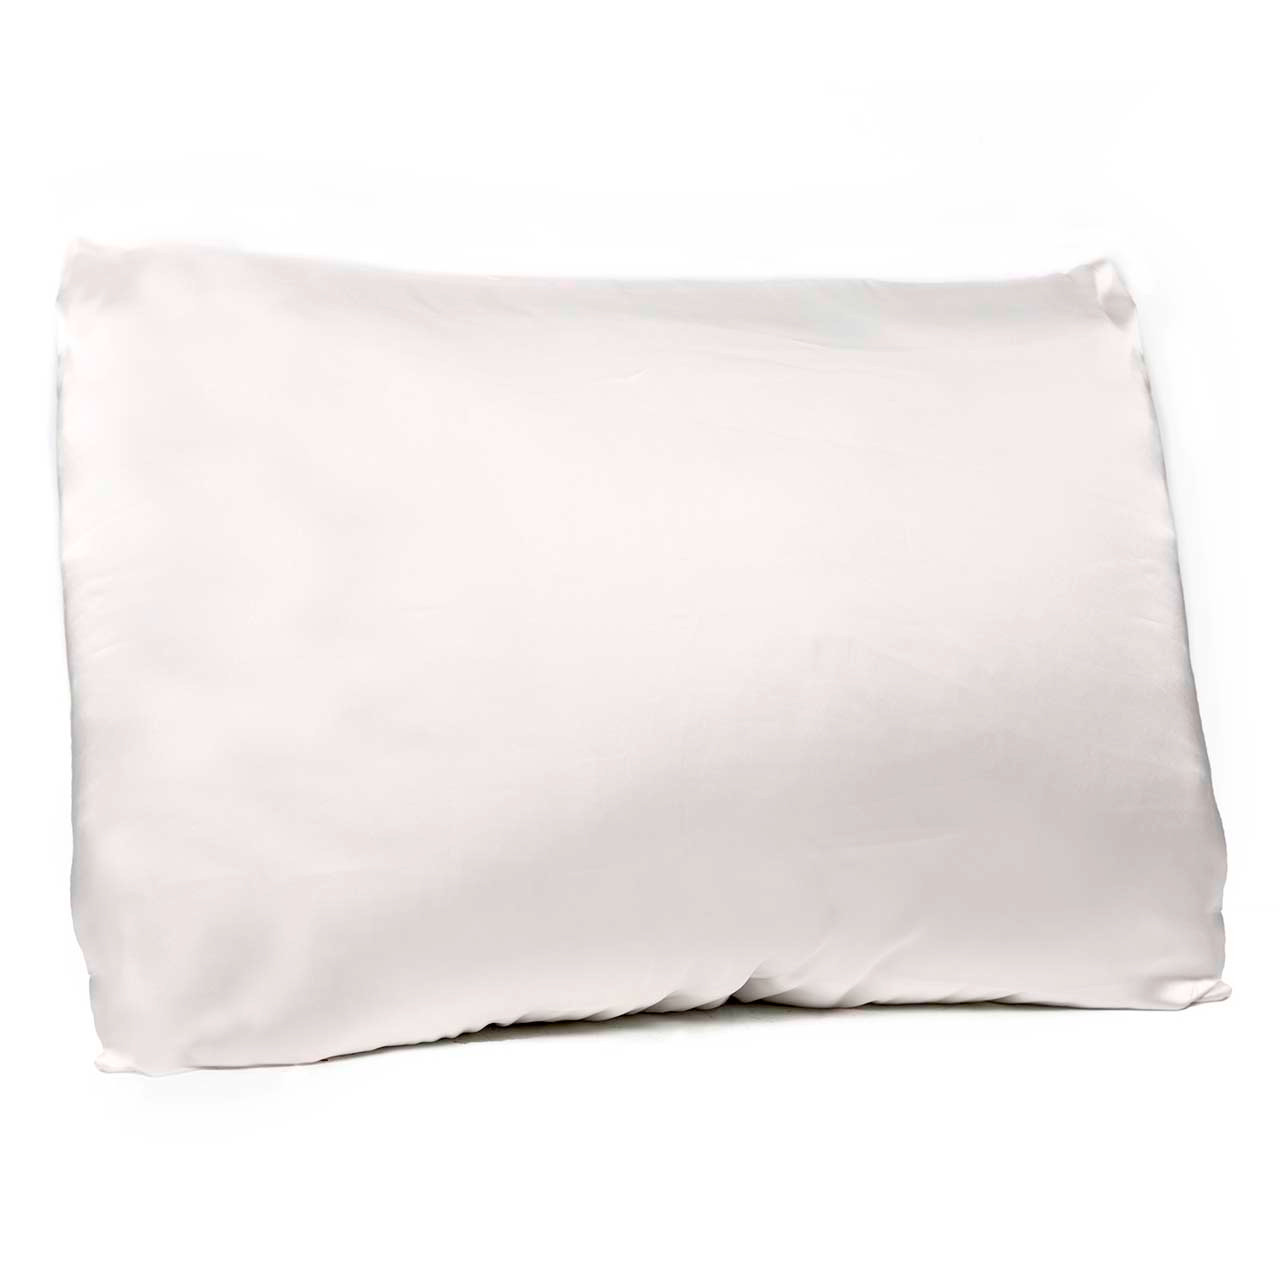 Satin Pillowcase with Monogram - CALL TO SPECIAL ORDER